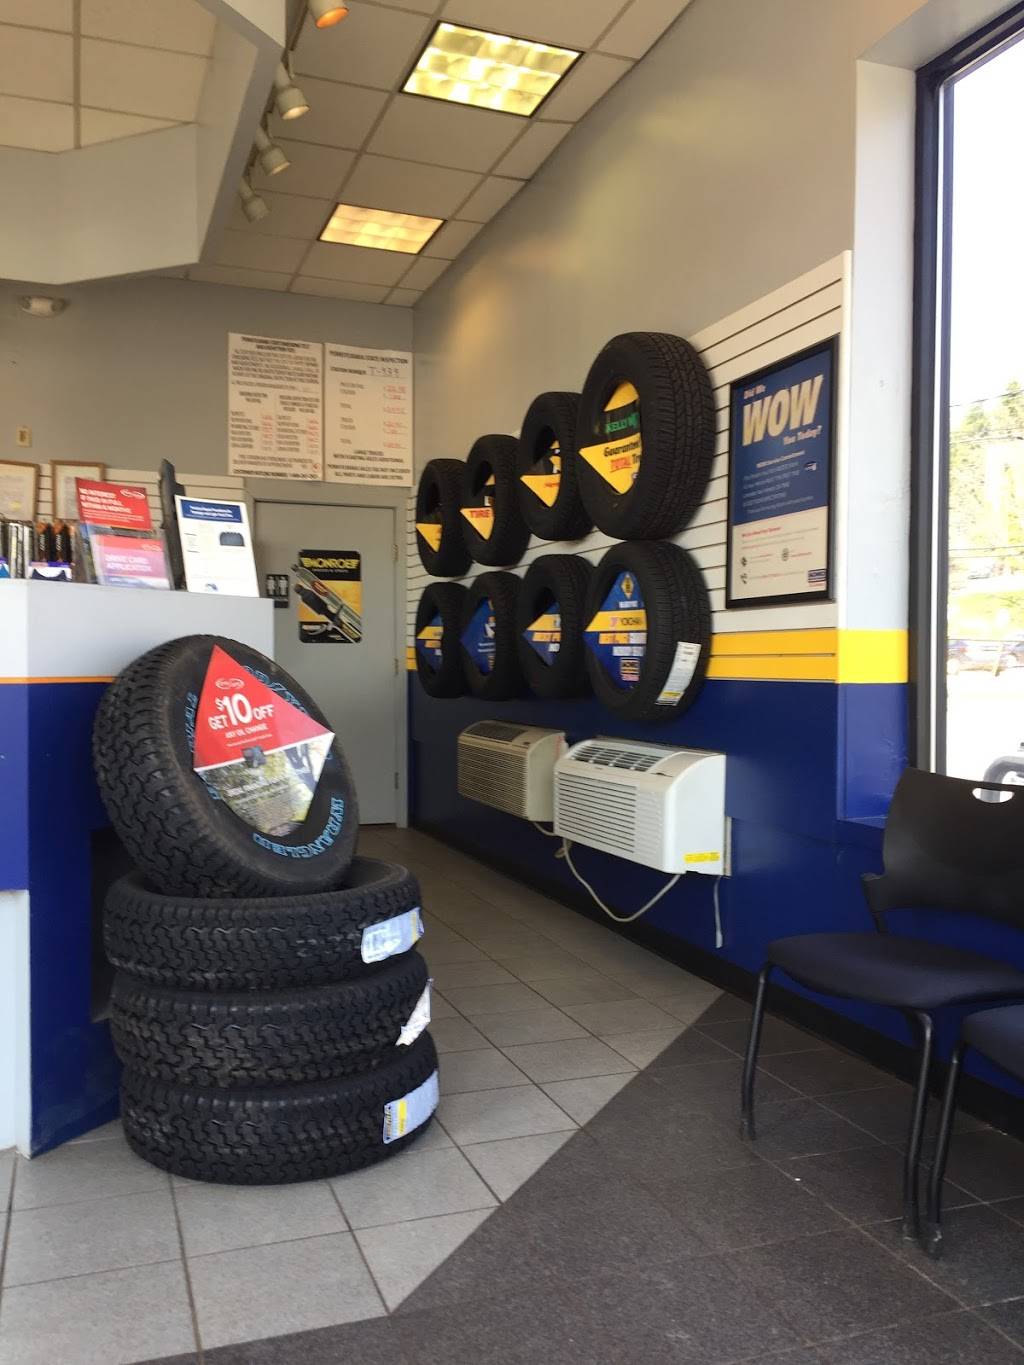 Monro Auto Service And Tire Centers | 5200 Library Rd, Bethel Park, PA 15102, USA | Phone: (412) 618-4718